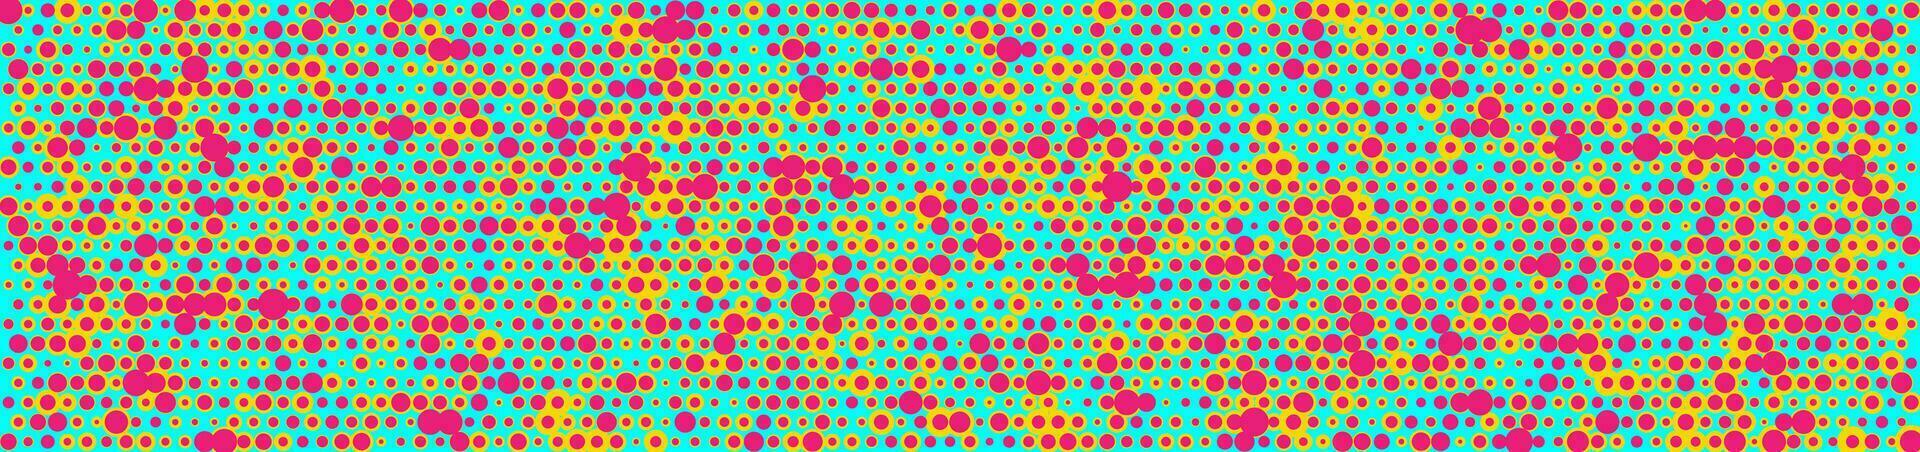 Colorful dots 3d effect abstract background vector